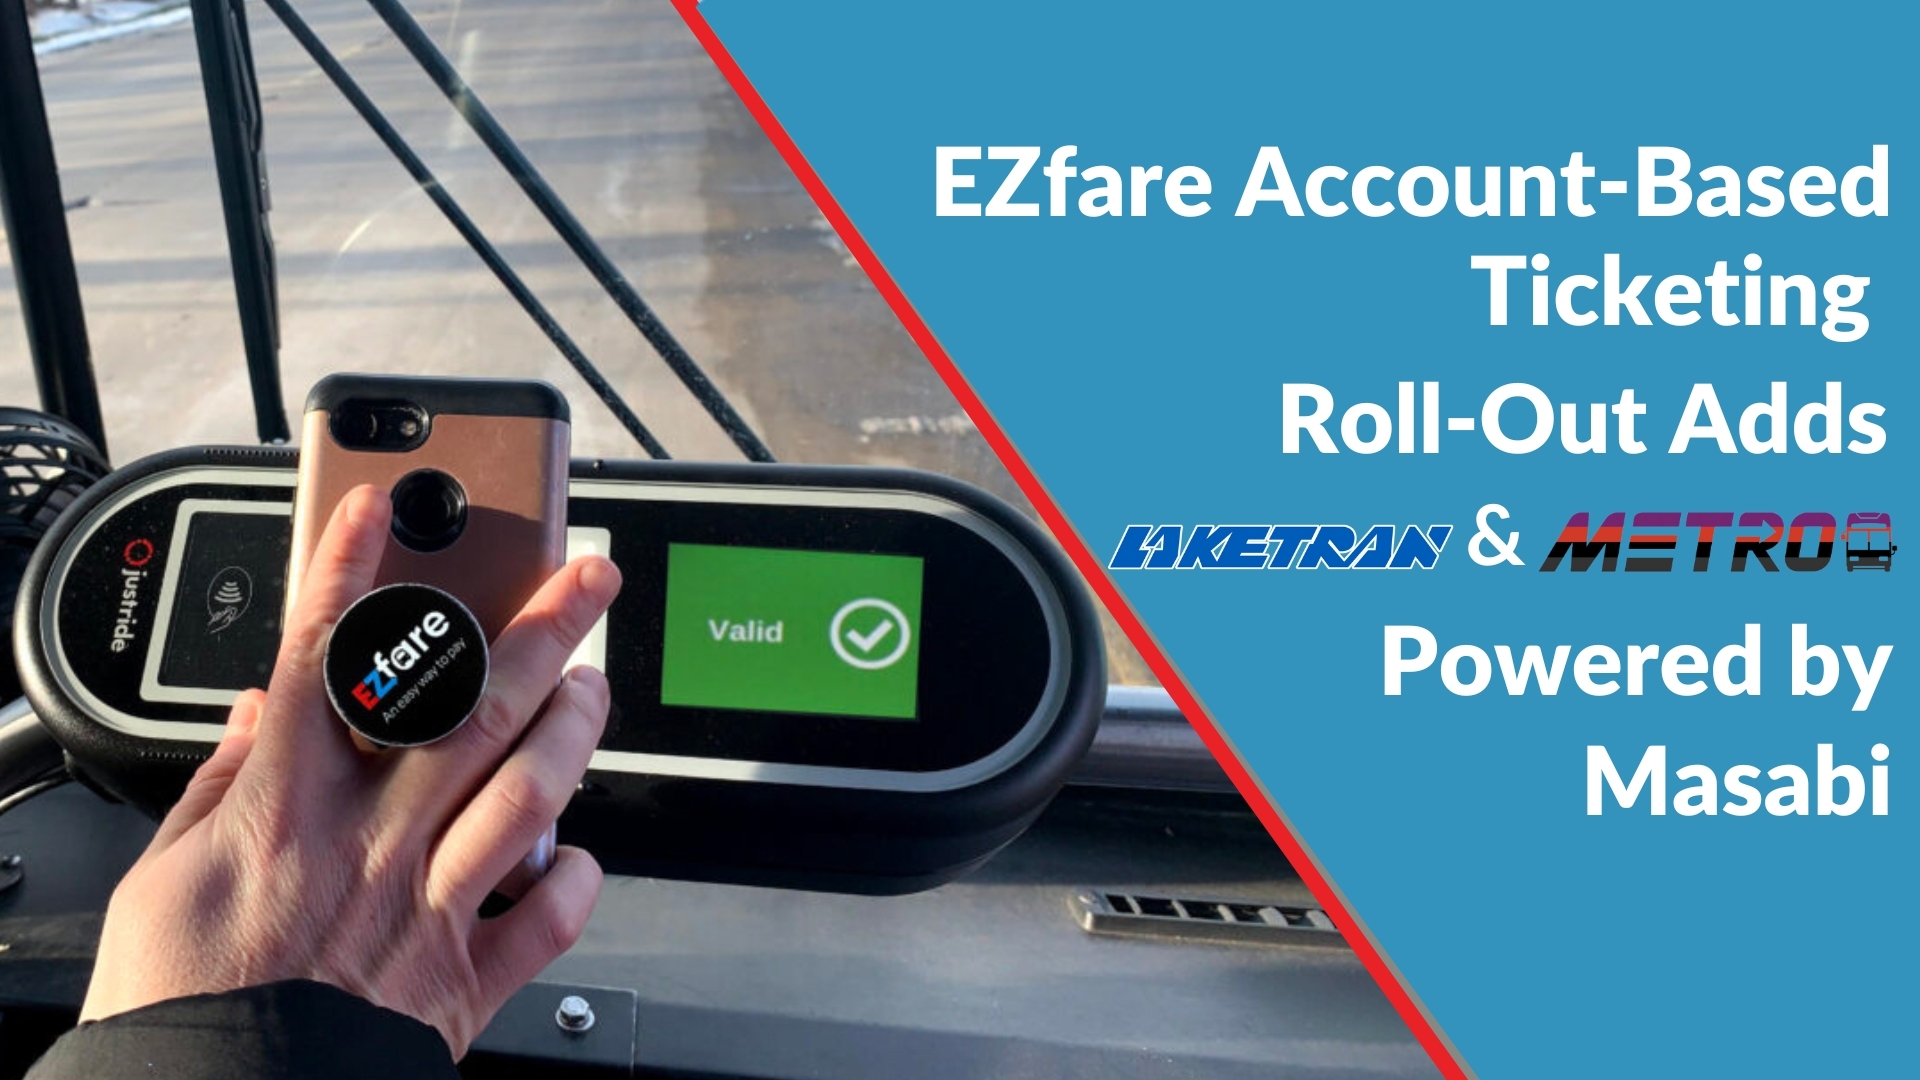 EZfare Account-Based Ticketing Roll-Out Adds Laketran and METRO, powered by Masabi (2)